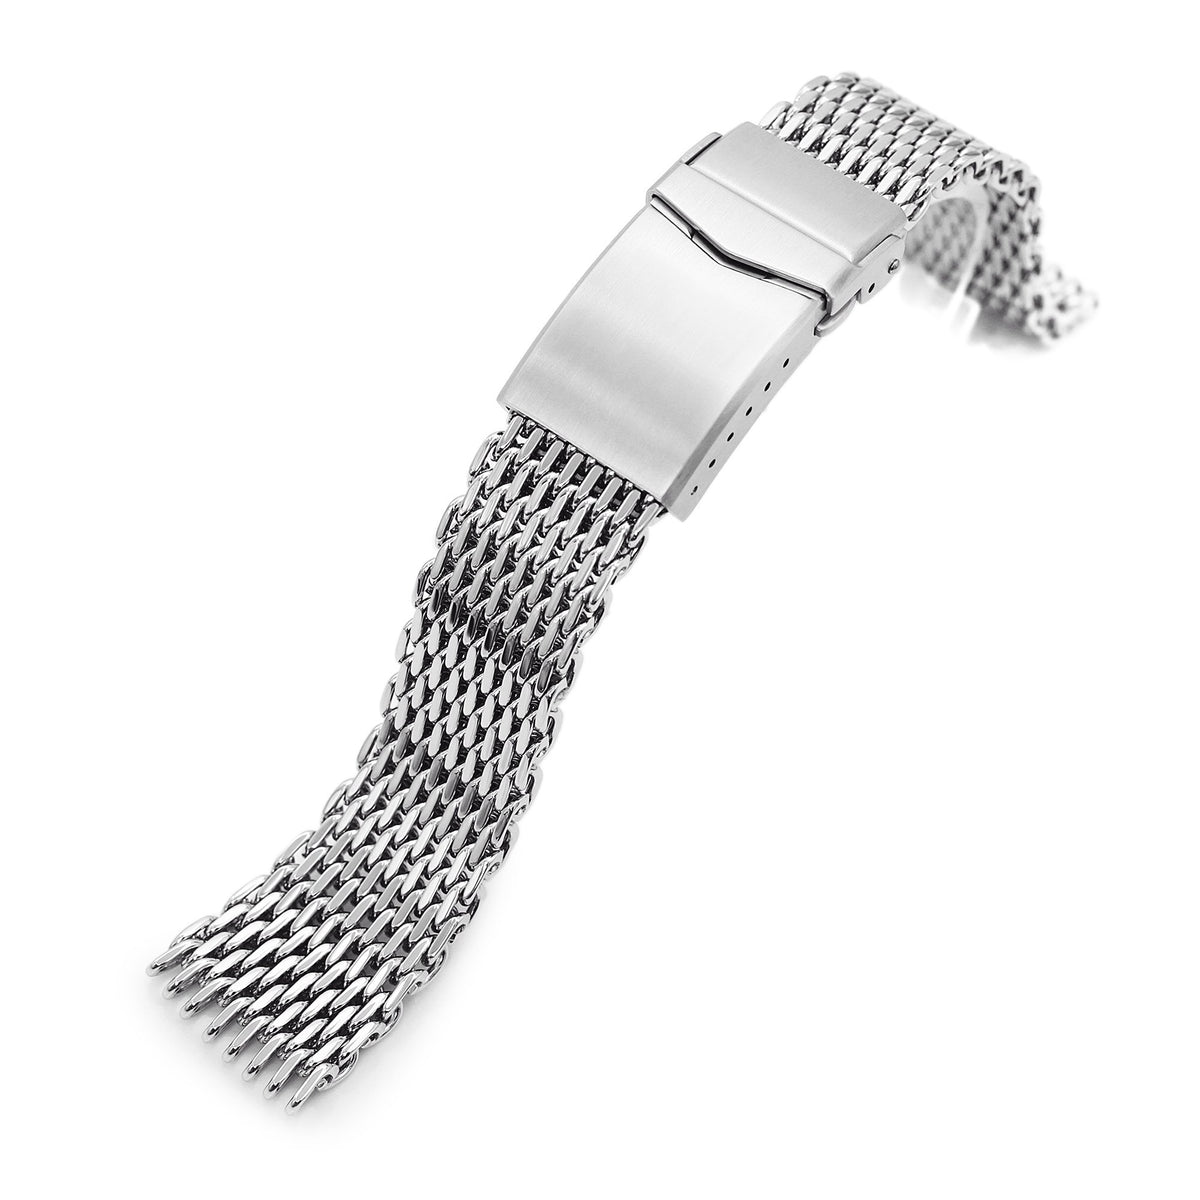 22mm Tapered &quot;SHARK&quot; Mesh Band Stainless Steel Watch Bracelet V-Clasp Polished Strapcode Watch Bands